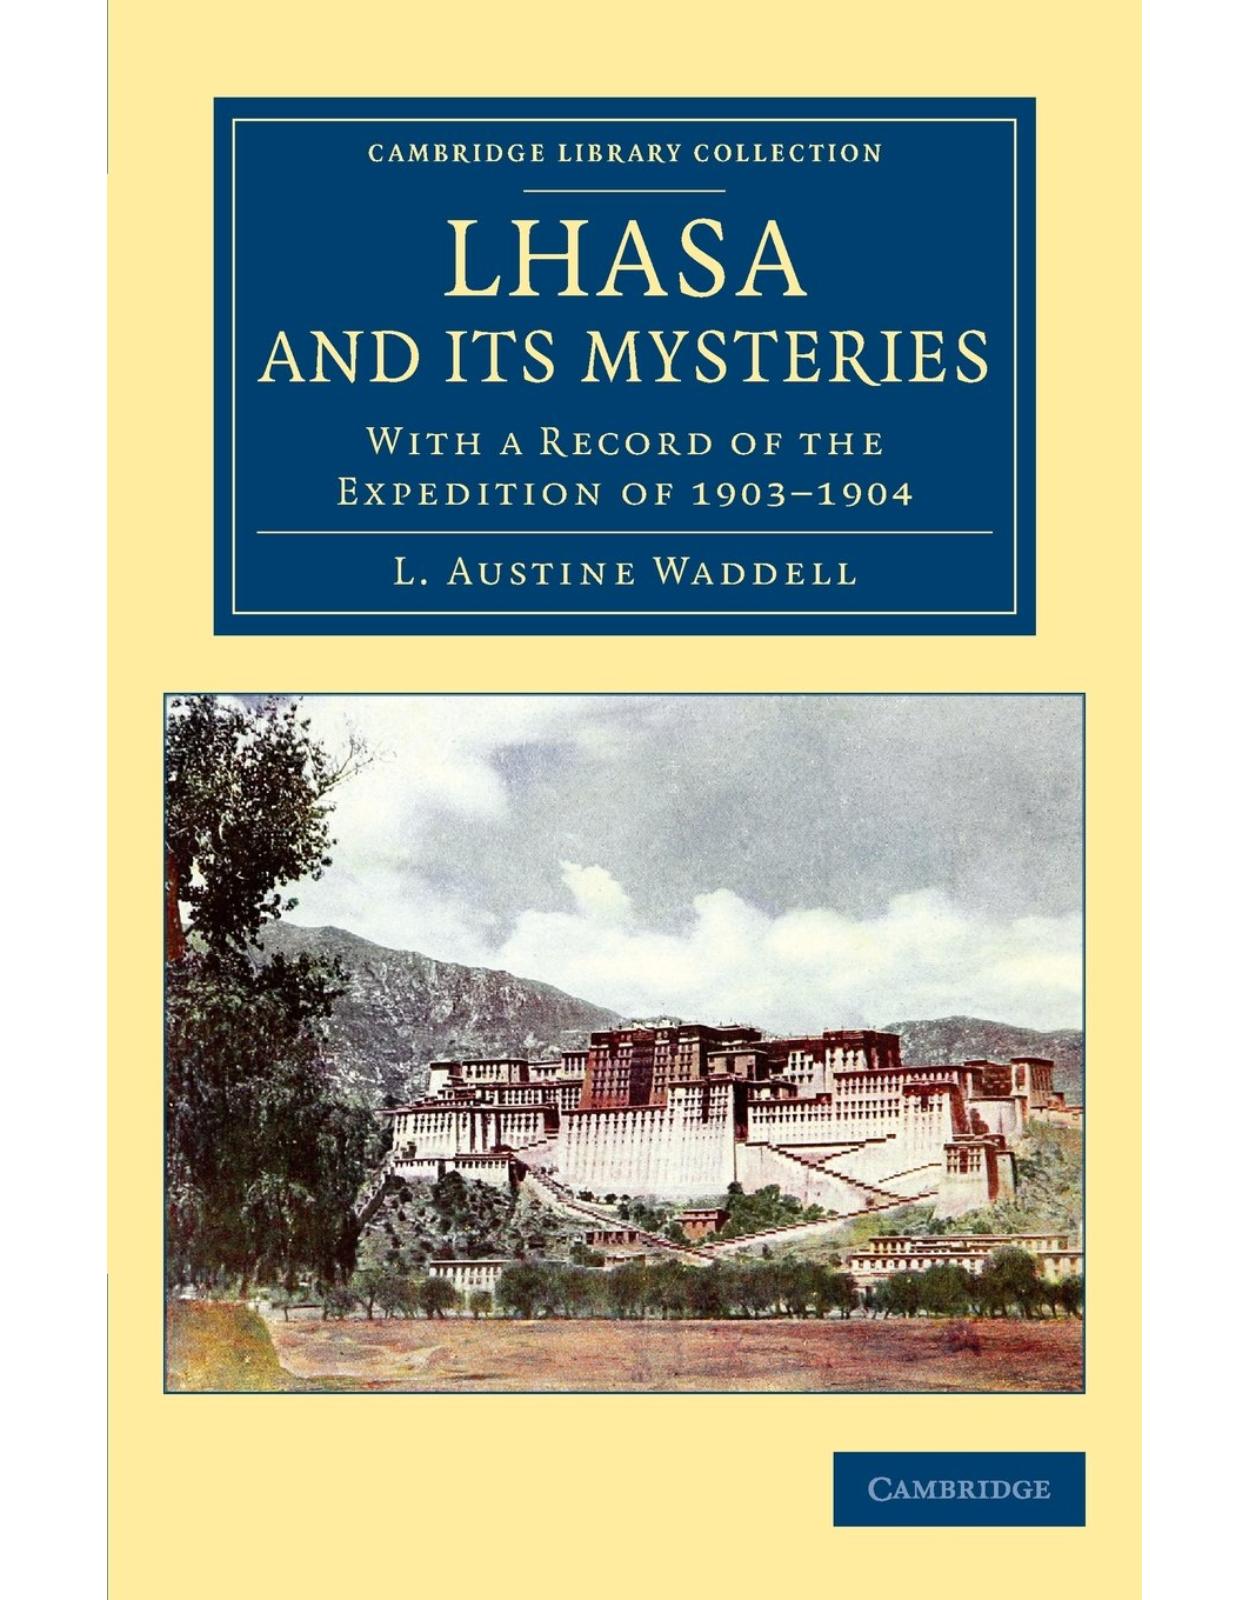 Lhasa and its Mysteries: With a Record of the Expedition of 1903-1904 (Cambridge Library Collection - Travel and Exploration in Asia) 